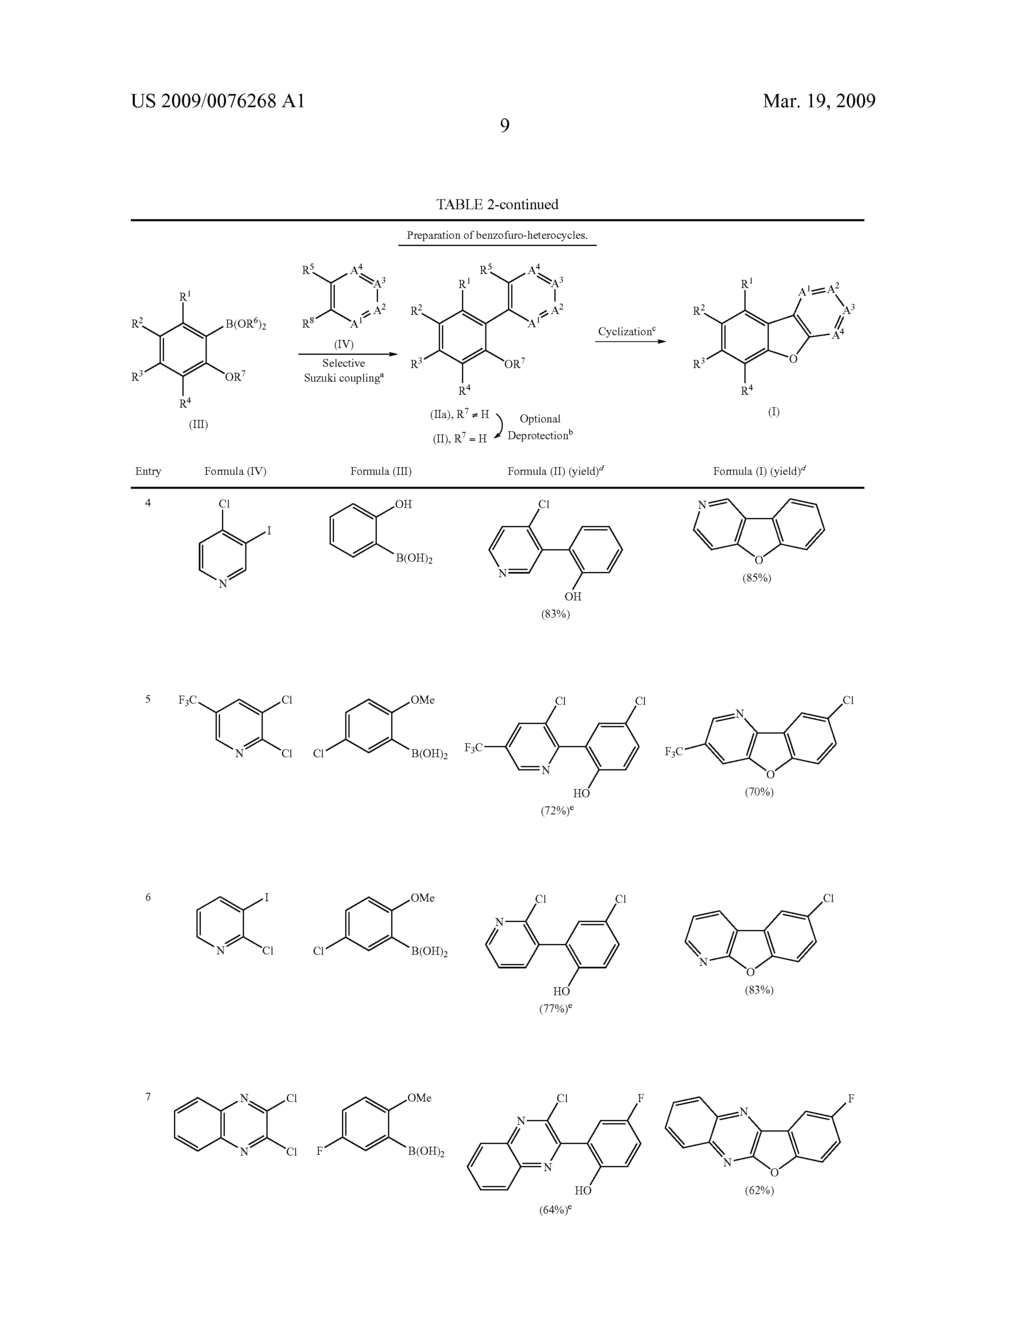 Facile assembly of fused benzofuro-heterocycles - diagram, schematic, and image 10